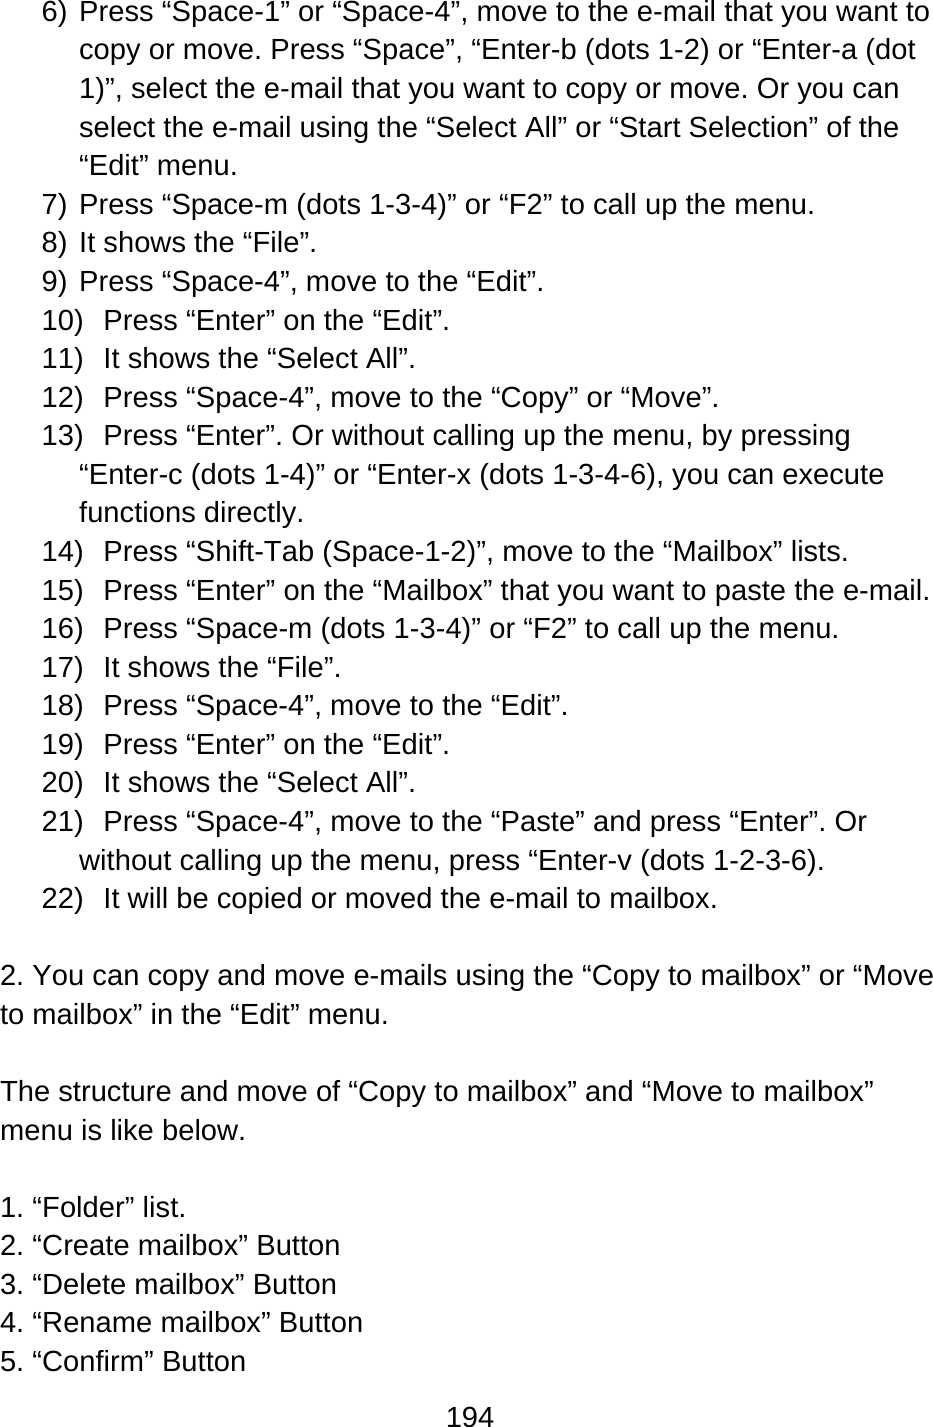 194  6) Press “Space-1” or “Space-4”, move to the e-mail that you want to copy or move. Press “Space”, “Enter-b (dots 1-2) or “Enter-a (dot 1)”, select the e-mail that you want to copy or move. Or you can select the e-mail using the “Select All” or “Start Selection” of the “Edit” menu. 7) Press “Space-m (dots 1-3-4)” or “F2” to call up the menu.   8) It shows the “File”. 9) Press “Space-4”, move to the “Edit”. 10)  Press “Enter” on the “Edit”. 11) It shows the “Select All”. 12) Press “Space-4”, move to the “Copy” or “Move”.   13)  Press “Enter”. Or without calling up the menu, by pressing “Enter-c (dots 1-4)” or “Enter-x (dots 1-3-4-6), you can execute functions directly. 14)  Press “Shift-Tab (Space-1-2)”, move to the “Mailbox” lists. 15)  Press “Enter” on the “Mailbox” that you want to paste the e-mail. 16)  Press “Space-m (dots 1-3-4)” or “F2” to call up the menu. 17)  It shows the “File”. 18) Press “Space-4”, move to the “Edit”. 19)  Press “Enter” on the “Edit”. 20) It shows the “Select All”. 21)  Press “Space-4”, move to the “Paste” and press “Enter”. Or without calling up the menu, press “Enter-v (dots 1-2-3-6). 22)  It will be copied or moved the e-mail to mailbox.  2. You can copy and move e-mails using the “Copy to mailbox” or “Move to mailbox” in the “Edit” menu.  The structure and move of “Copy to mailbox” and “Move to mailbox” menu is like below.  1. “Folder” list. 2. “Create mailbox” Button 3. “Delete mailbox” Button 4. “Rename mailbox” Button 5. “Confirm” Button 